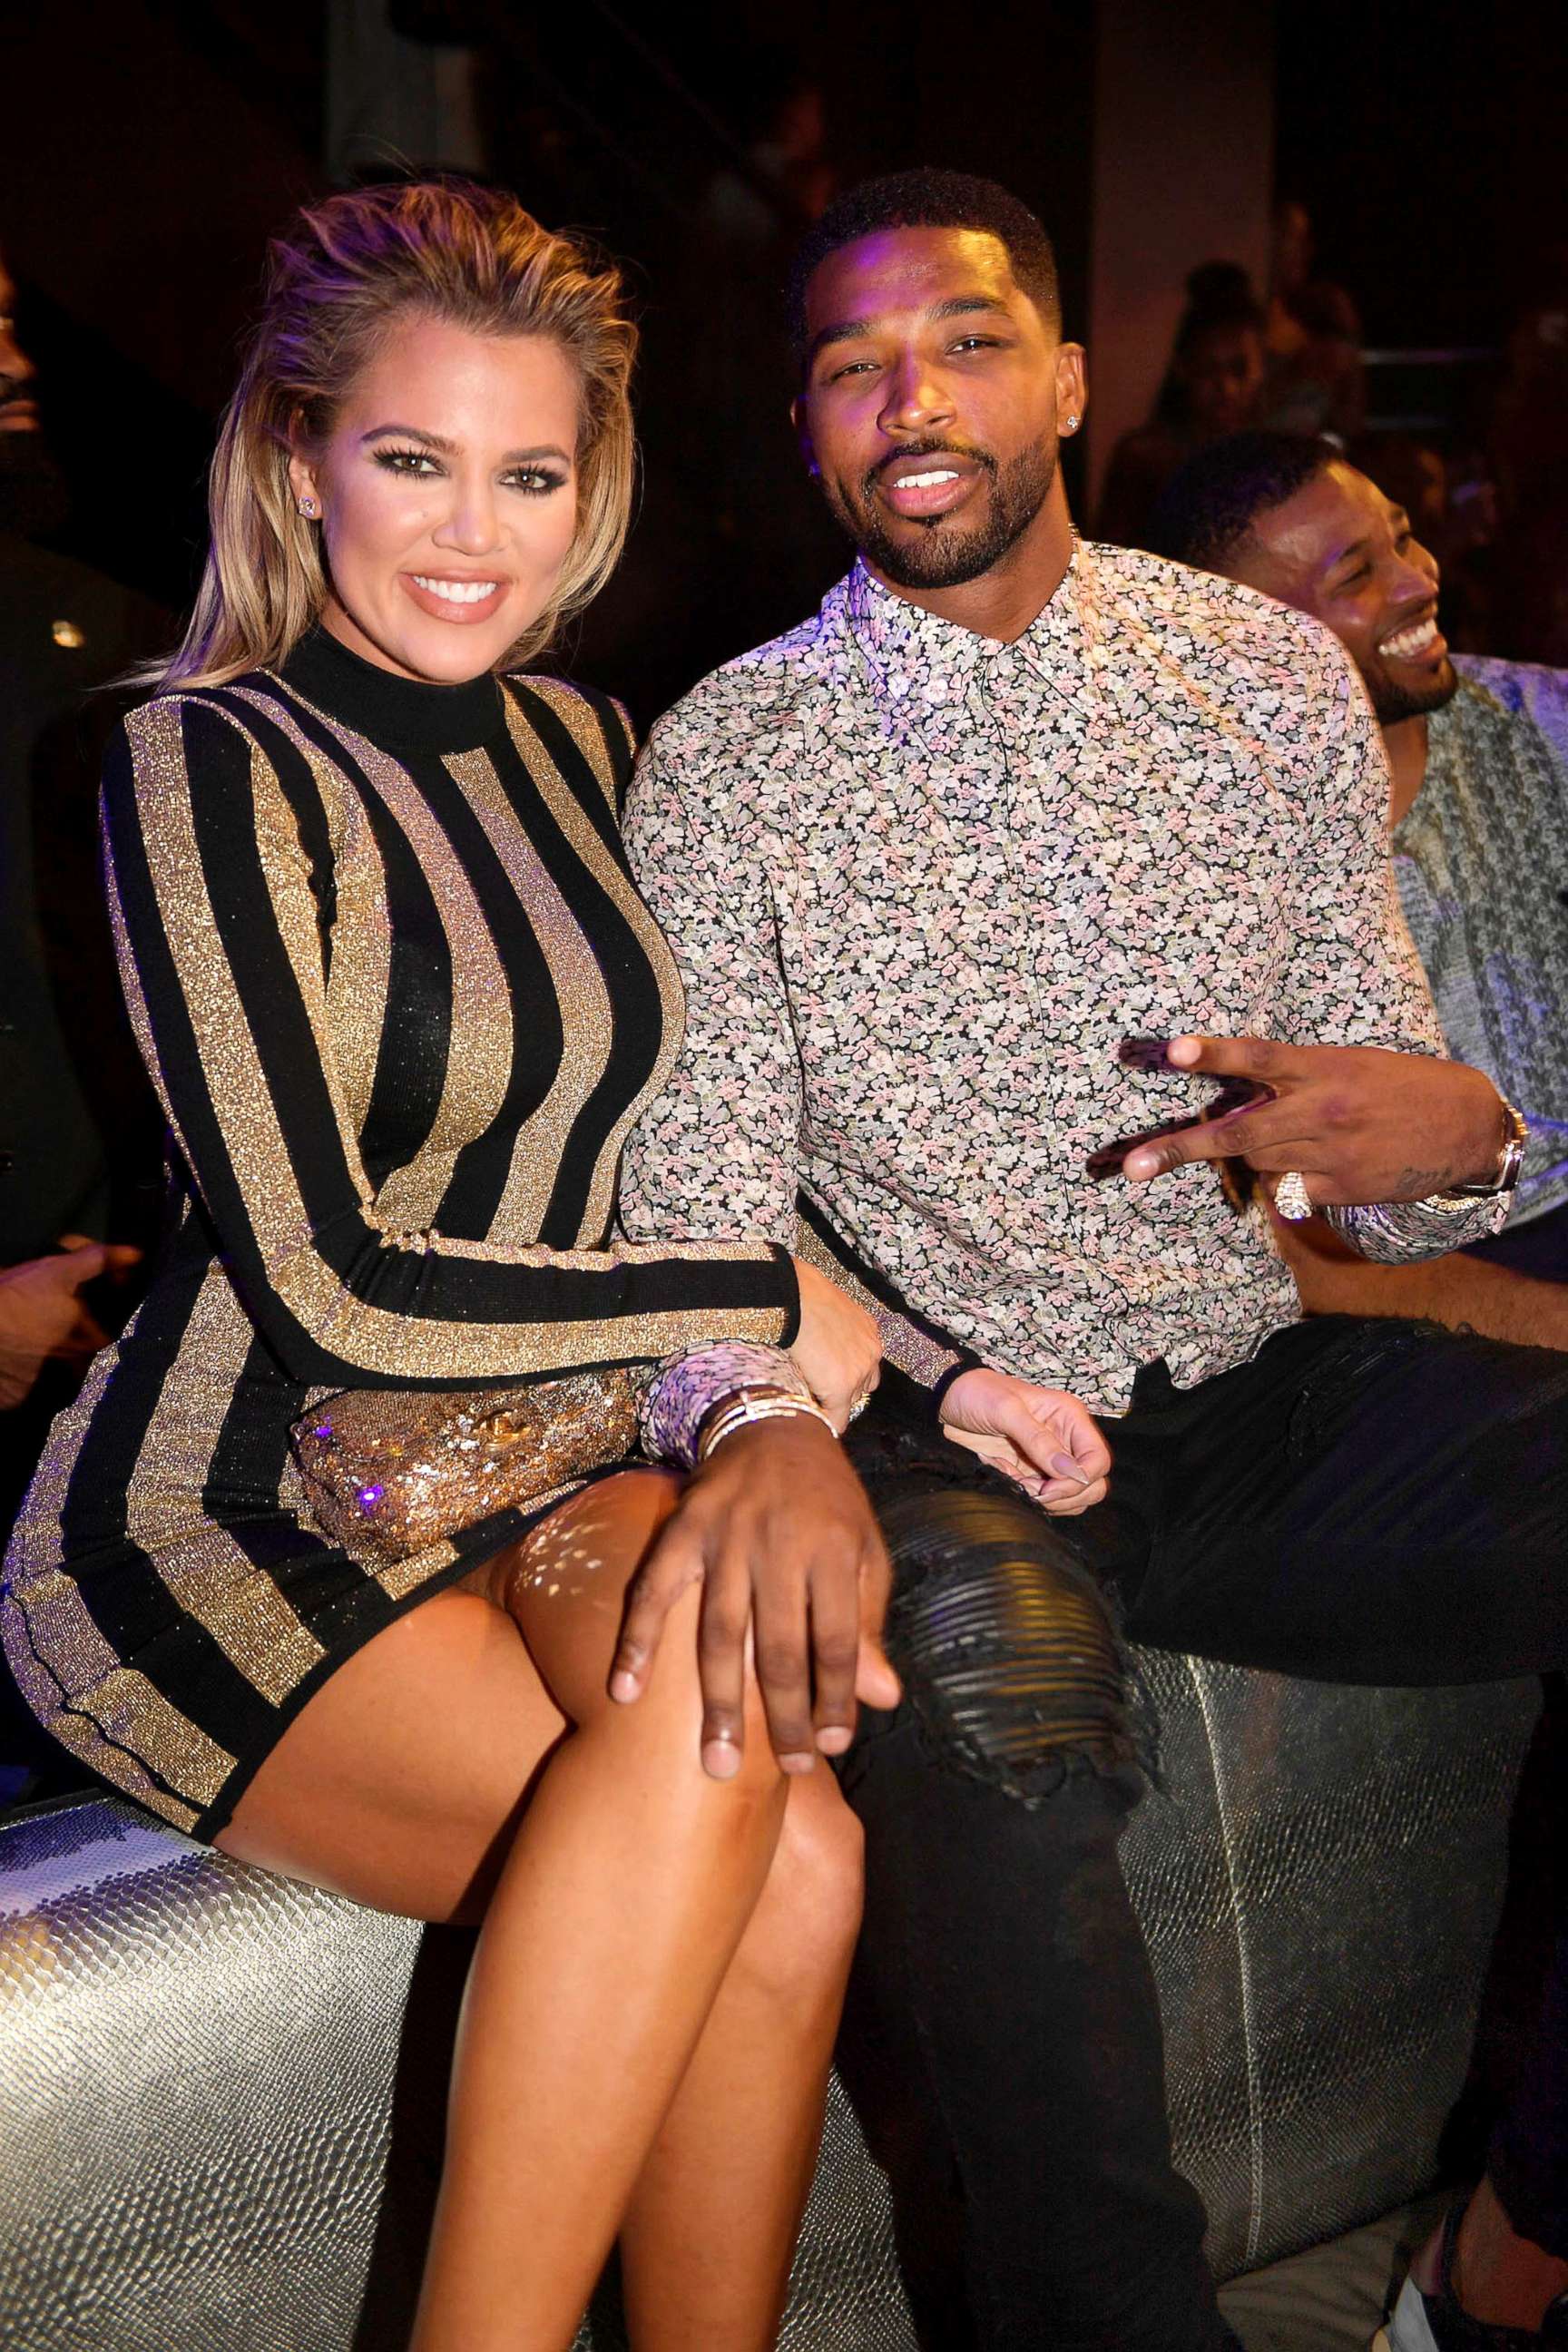 PHOTO: Khloe Kardashian And Tristan Thompson at LIV at Fontainebleau in this Sept. 18, 2016 file photo in Miami.